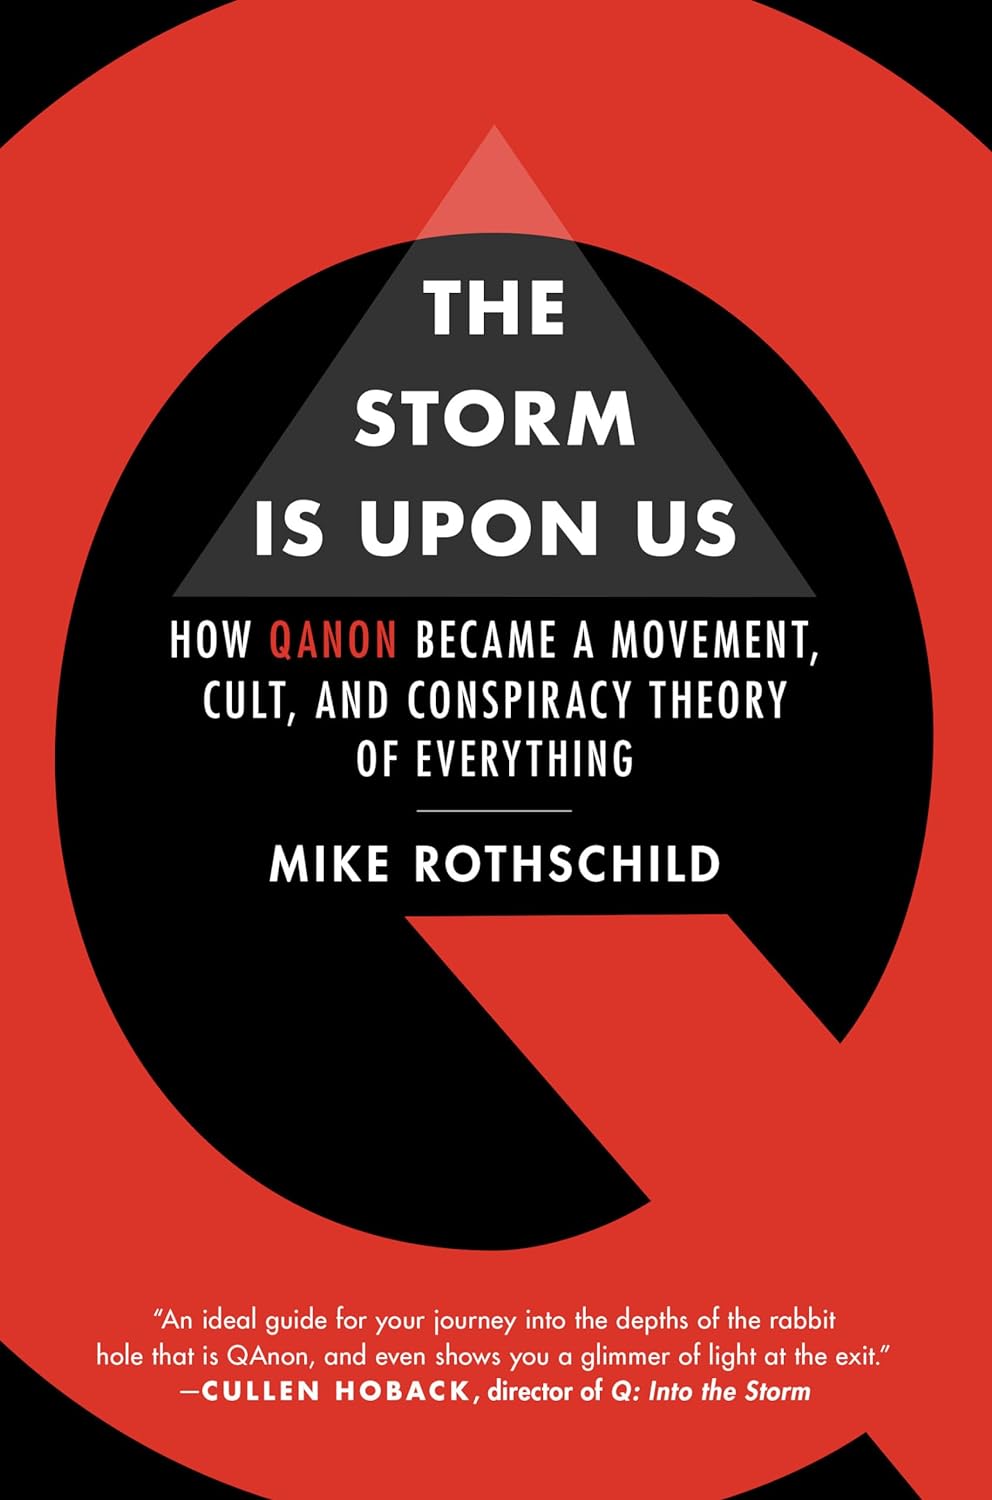 Mike Rothschild: The Storm is Upon Us (Hardcover, 2021, Melville House)